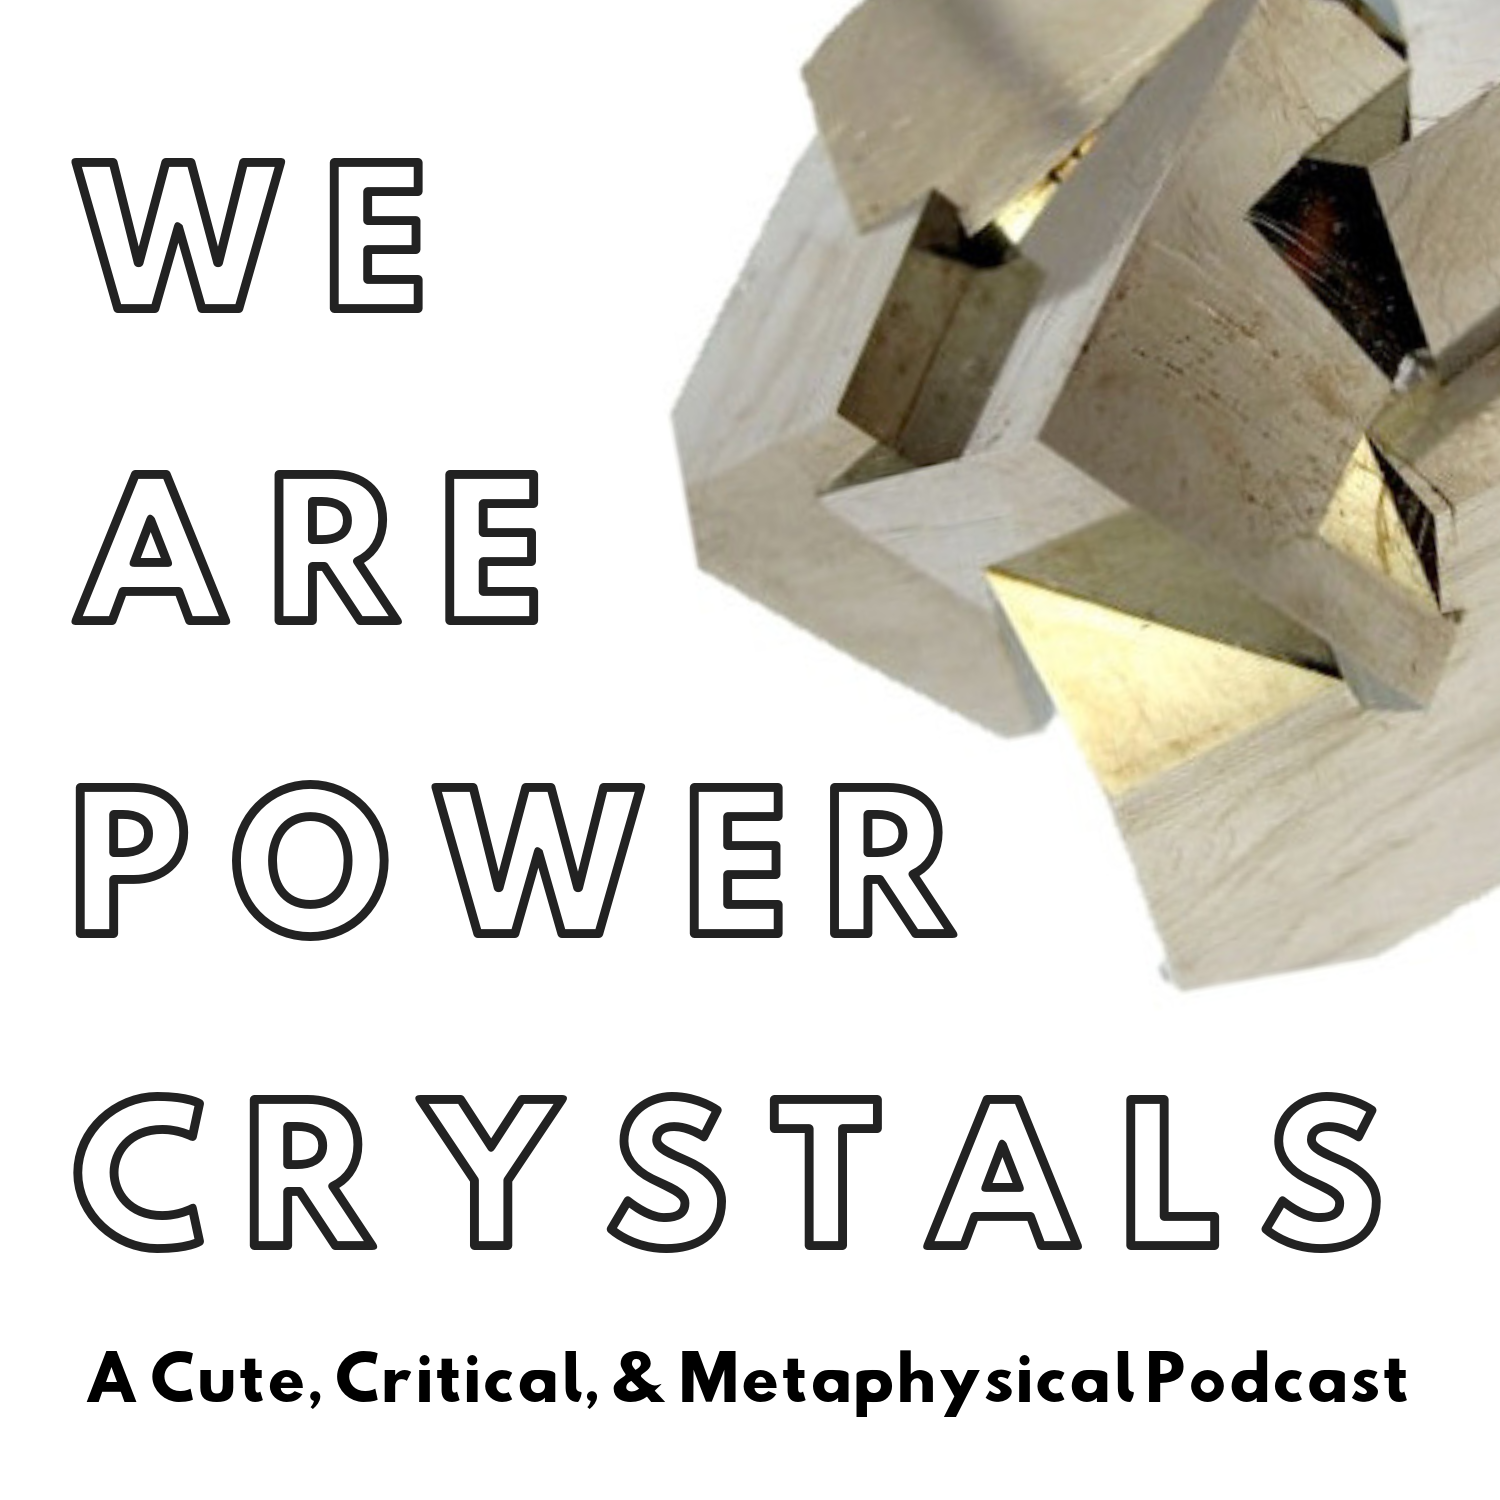 We Are Power Crystals Podcast